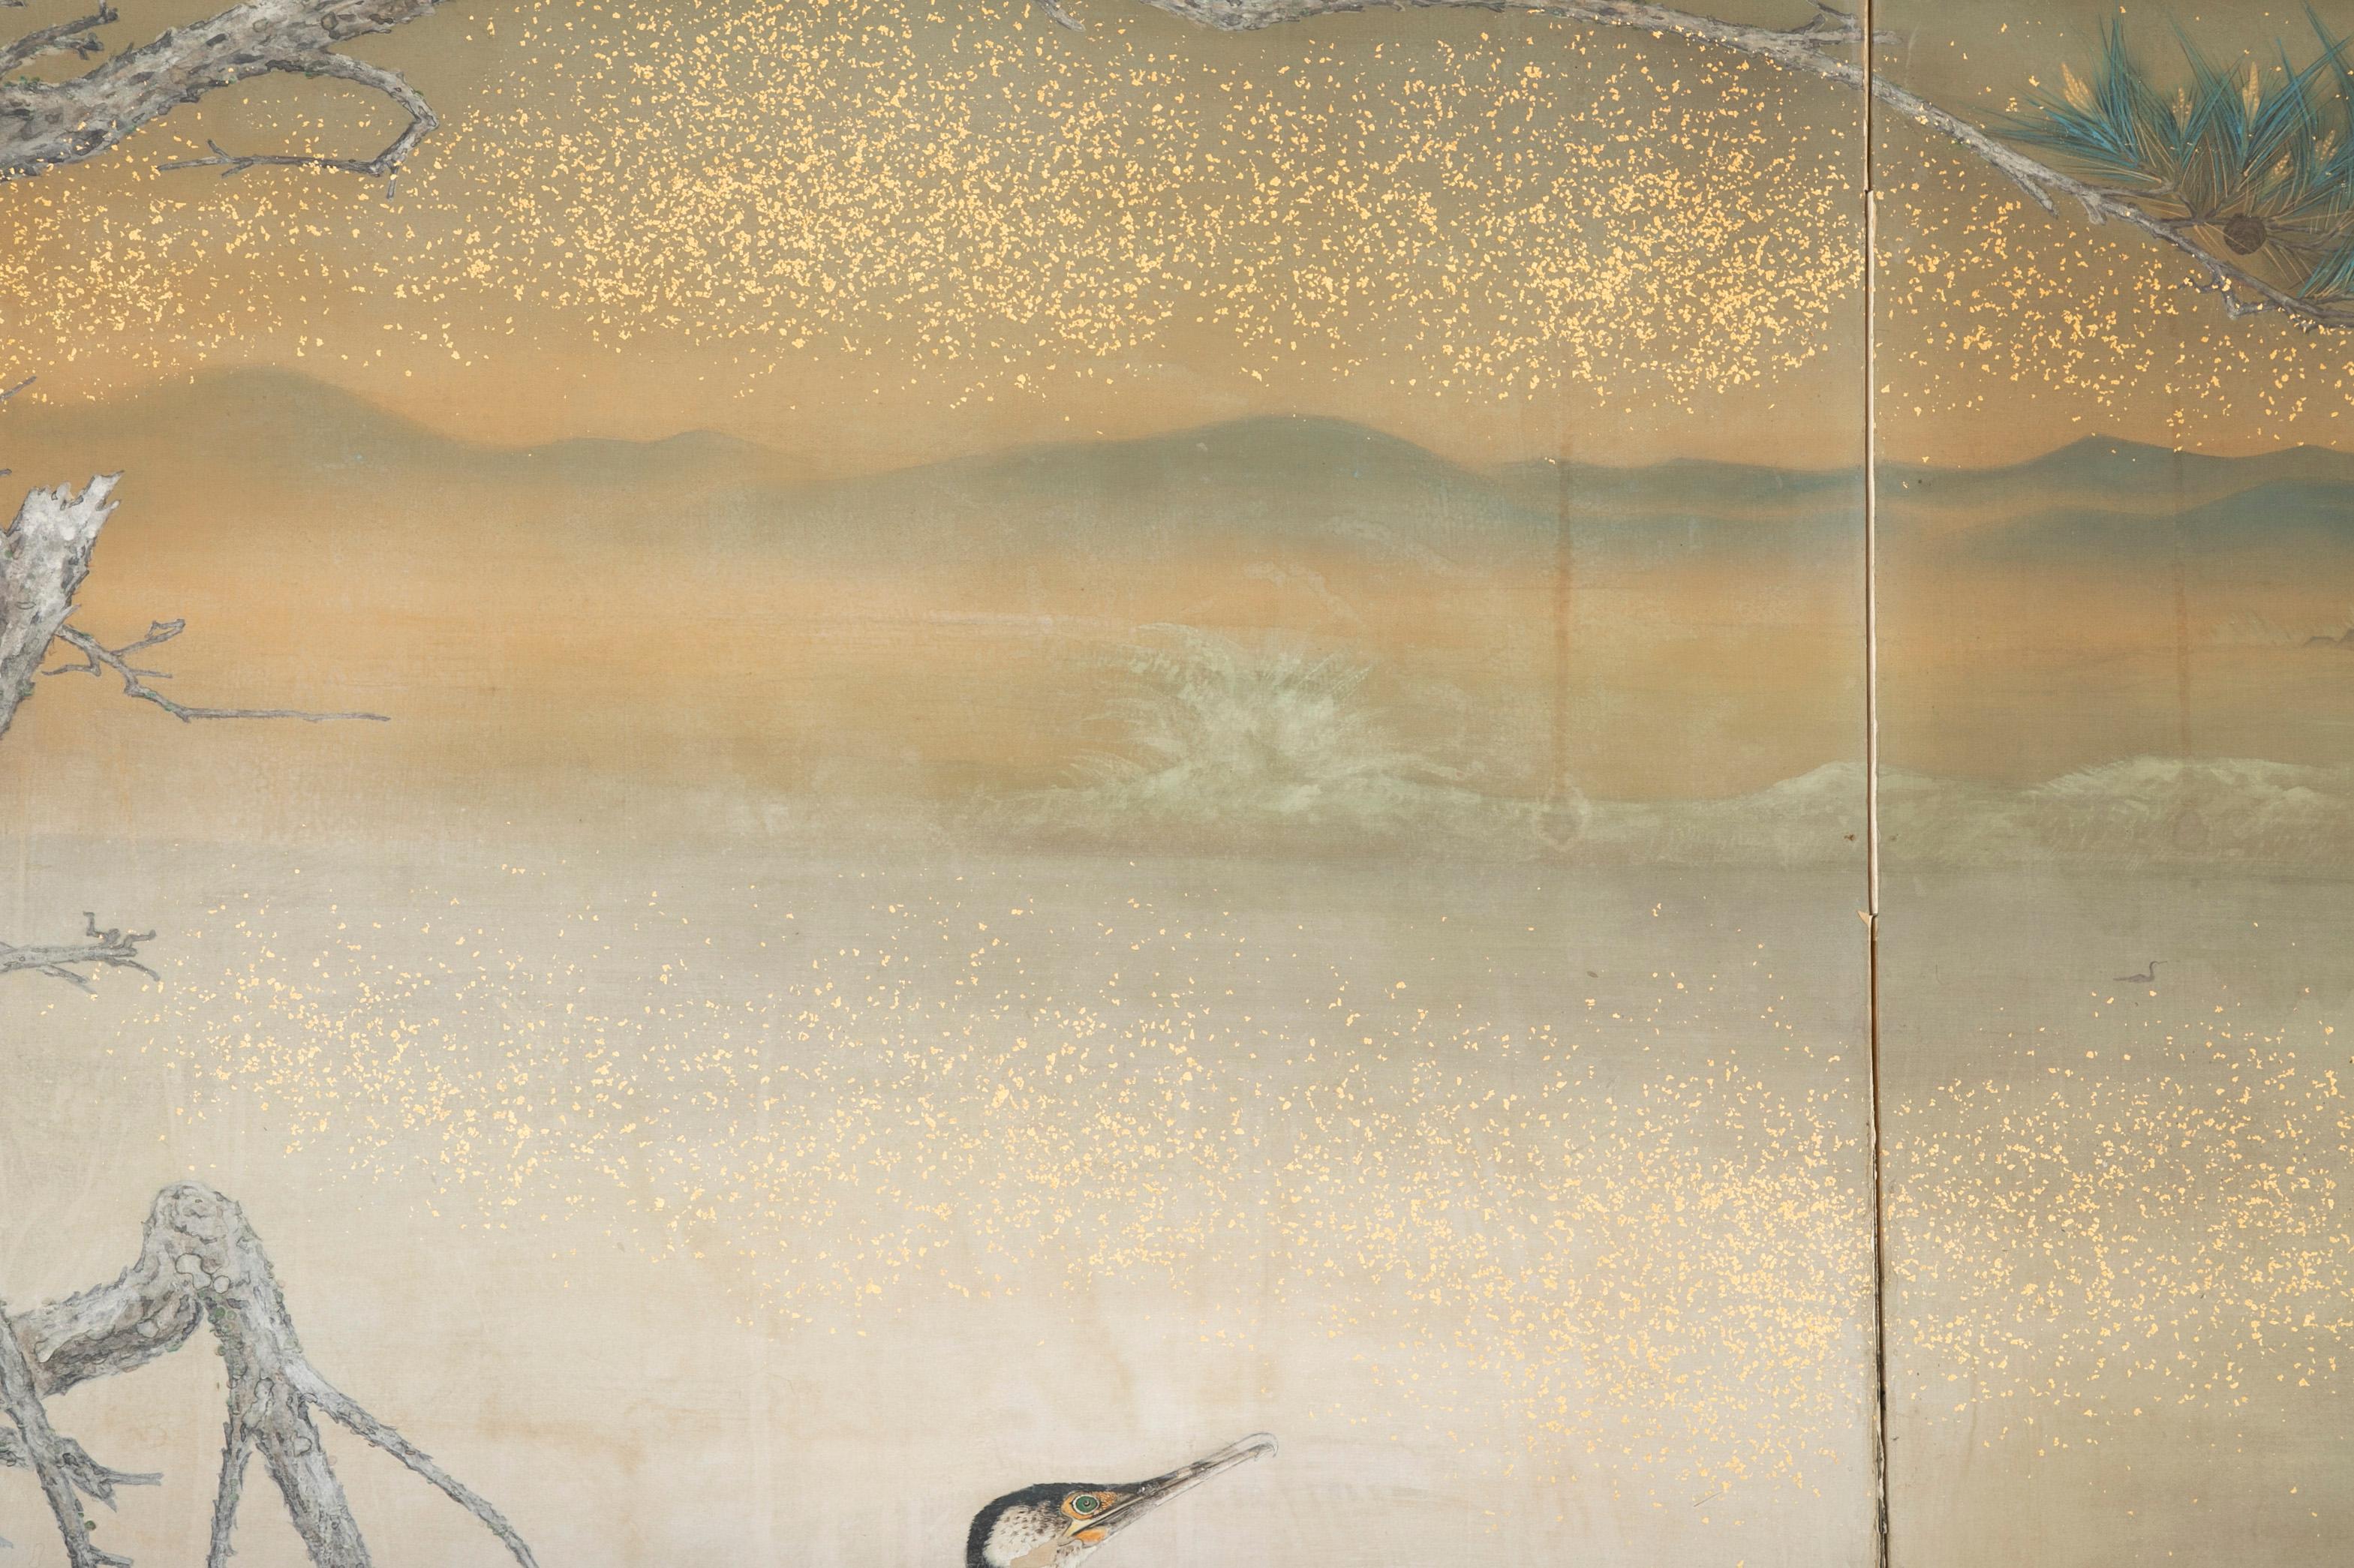 Taisho Period Painted Silk Screen Depicting Nesting Cormorants by Asami Joujou In Good Condition For Sale In Stamford, CT